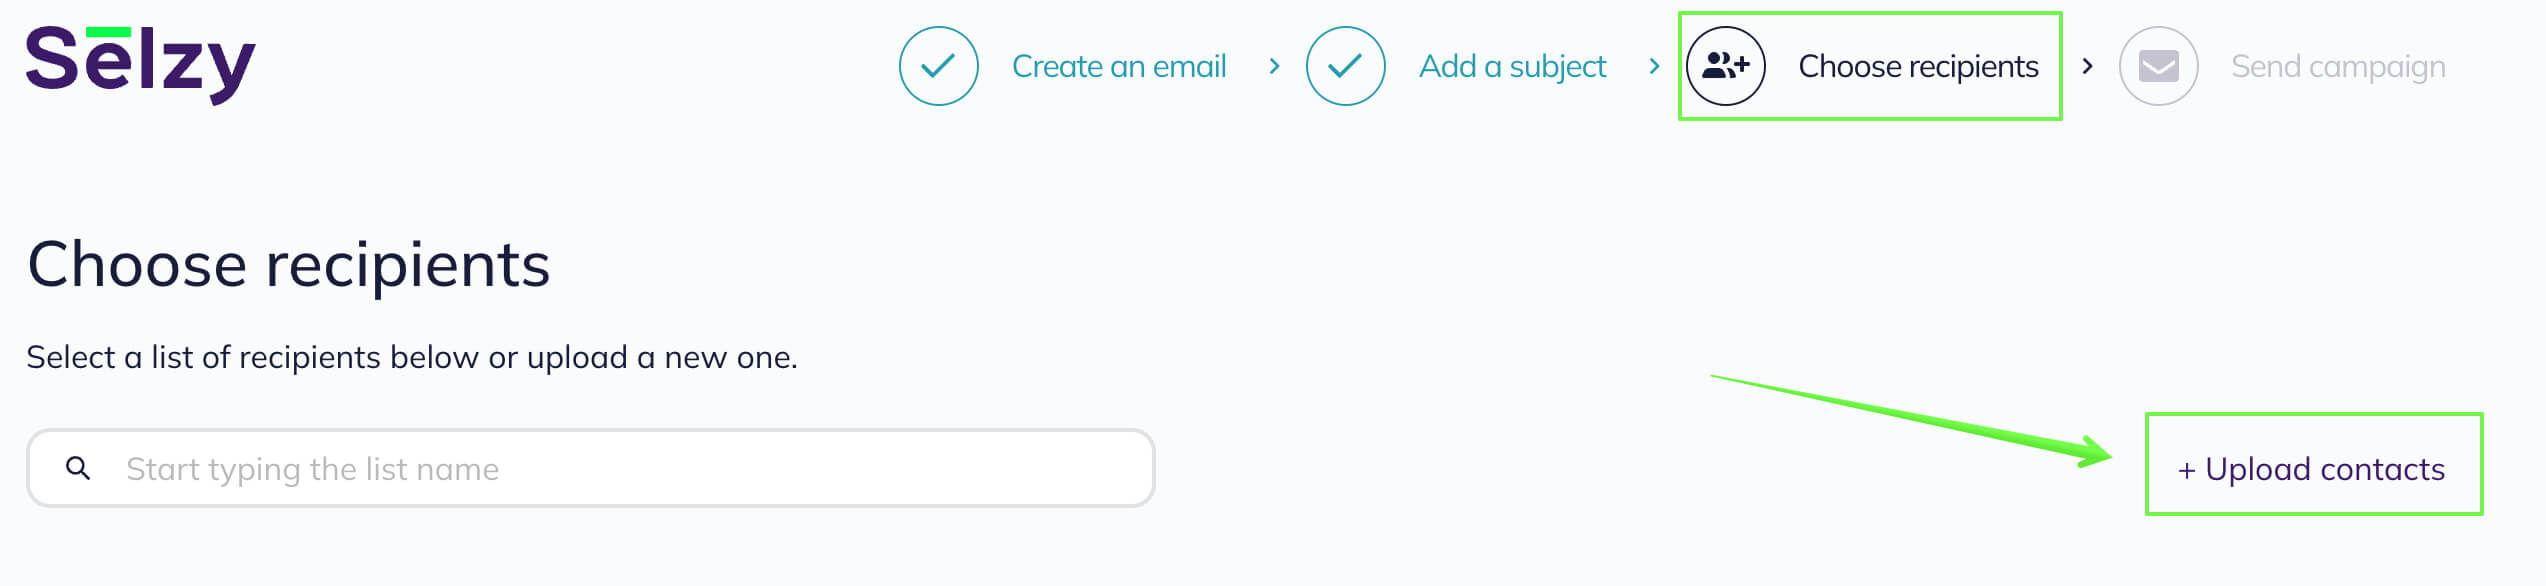 How to add contacts to the list before sending a campaign: click Upload contacts at the Choose recipients stage.